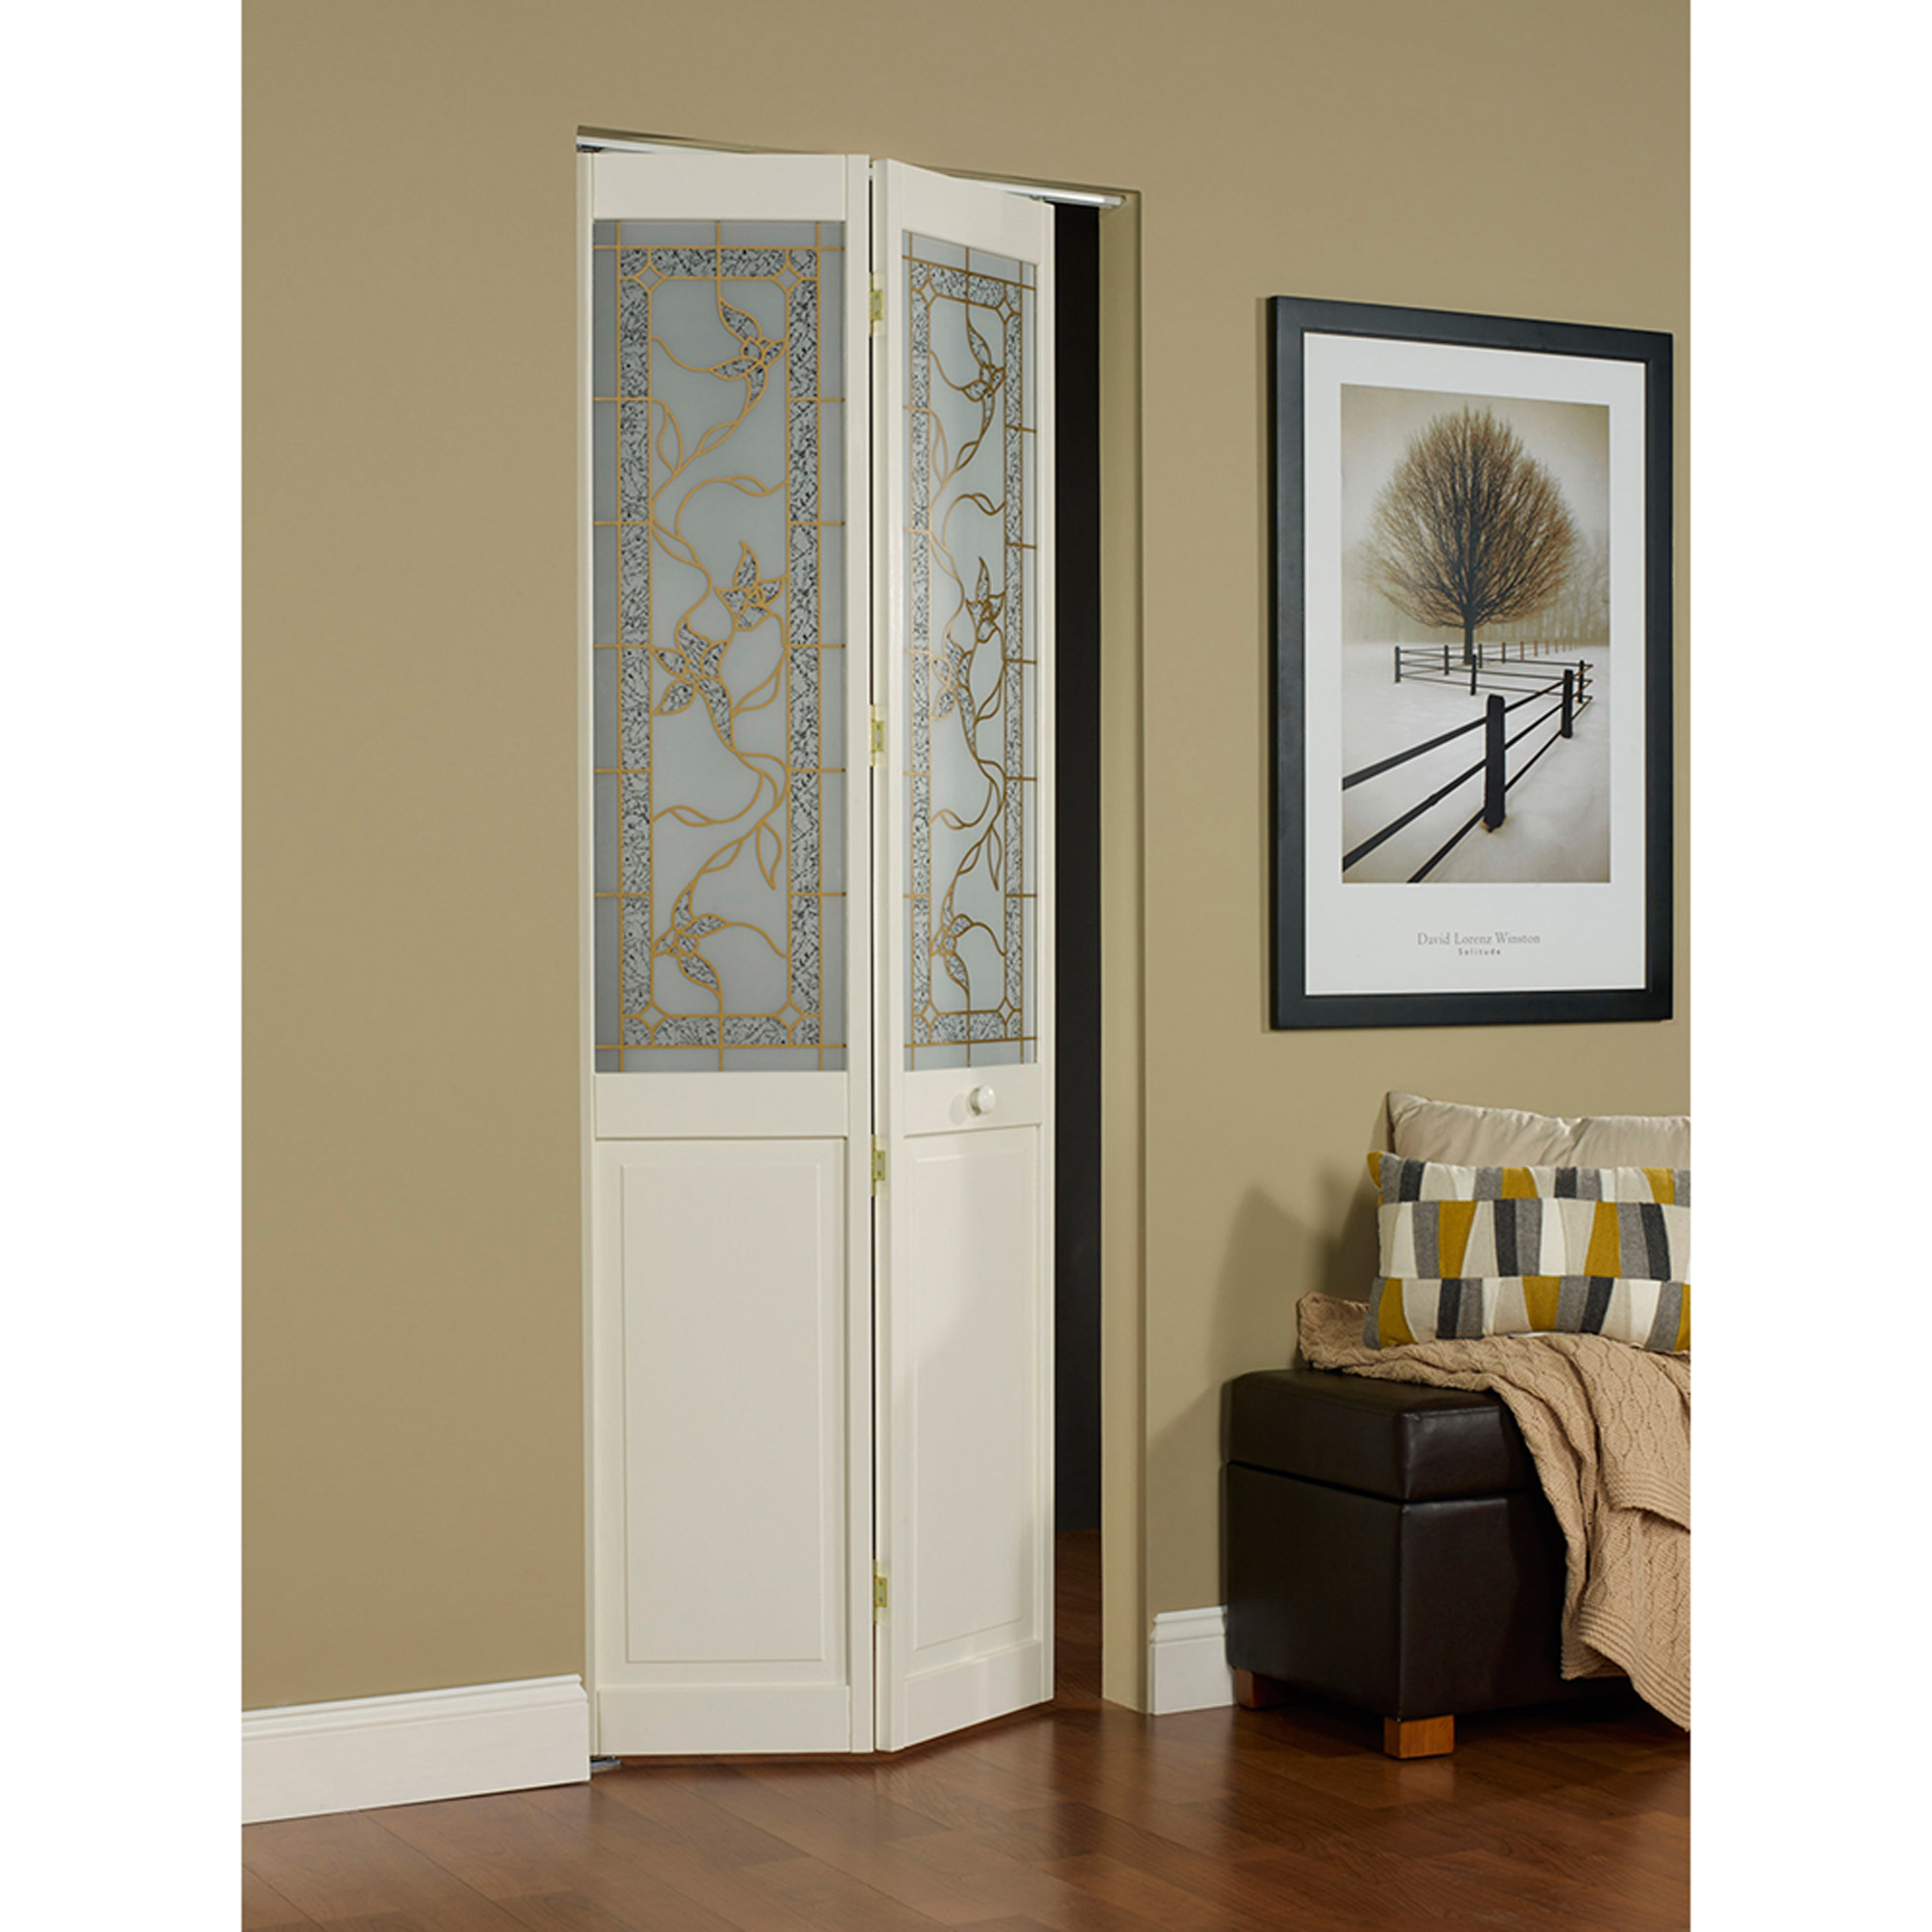 LTL Home Products Pinecroft Tuscany Decorative Glass/Raised Panel Interior Bifold Solid Pine Wood Door, 24" x 80", Unfinished Pine 24x80 Inch - image 1 of 8